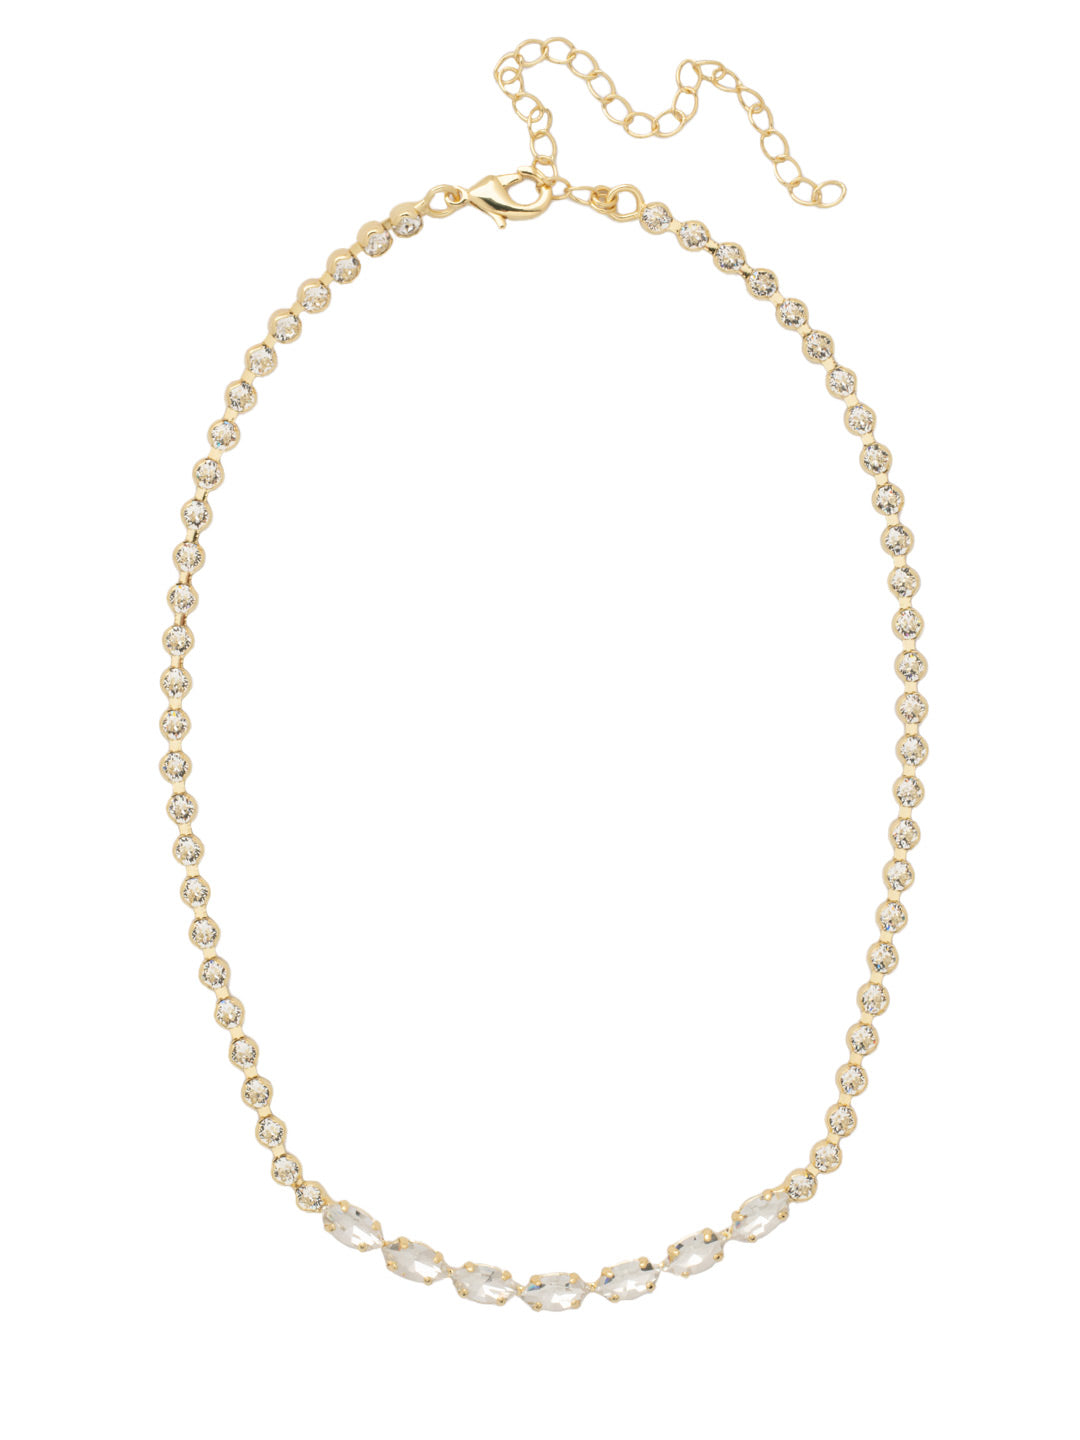 Clarissa Rhinestone Chain Tennis Necklace - NFL6BGCRY - <p>The Clarissa Rhinestone Chain Tennis Necklace features a line of navette cut crystals on an adjustable rhinestone chain, secured with a lobster claw clasp. From Sorrelli's Crystal collection in our Bright Gold-tone finish.</p>